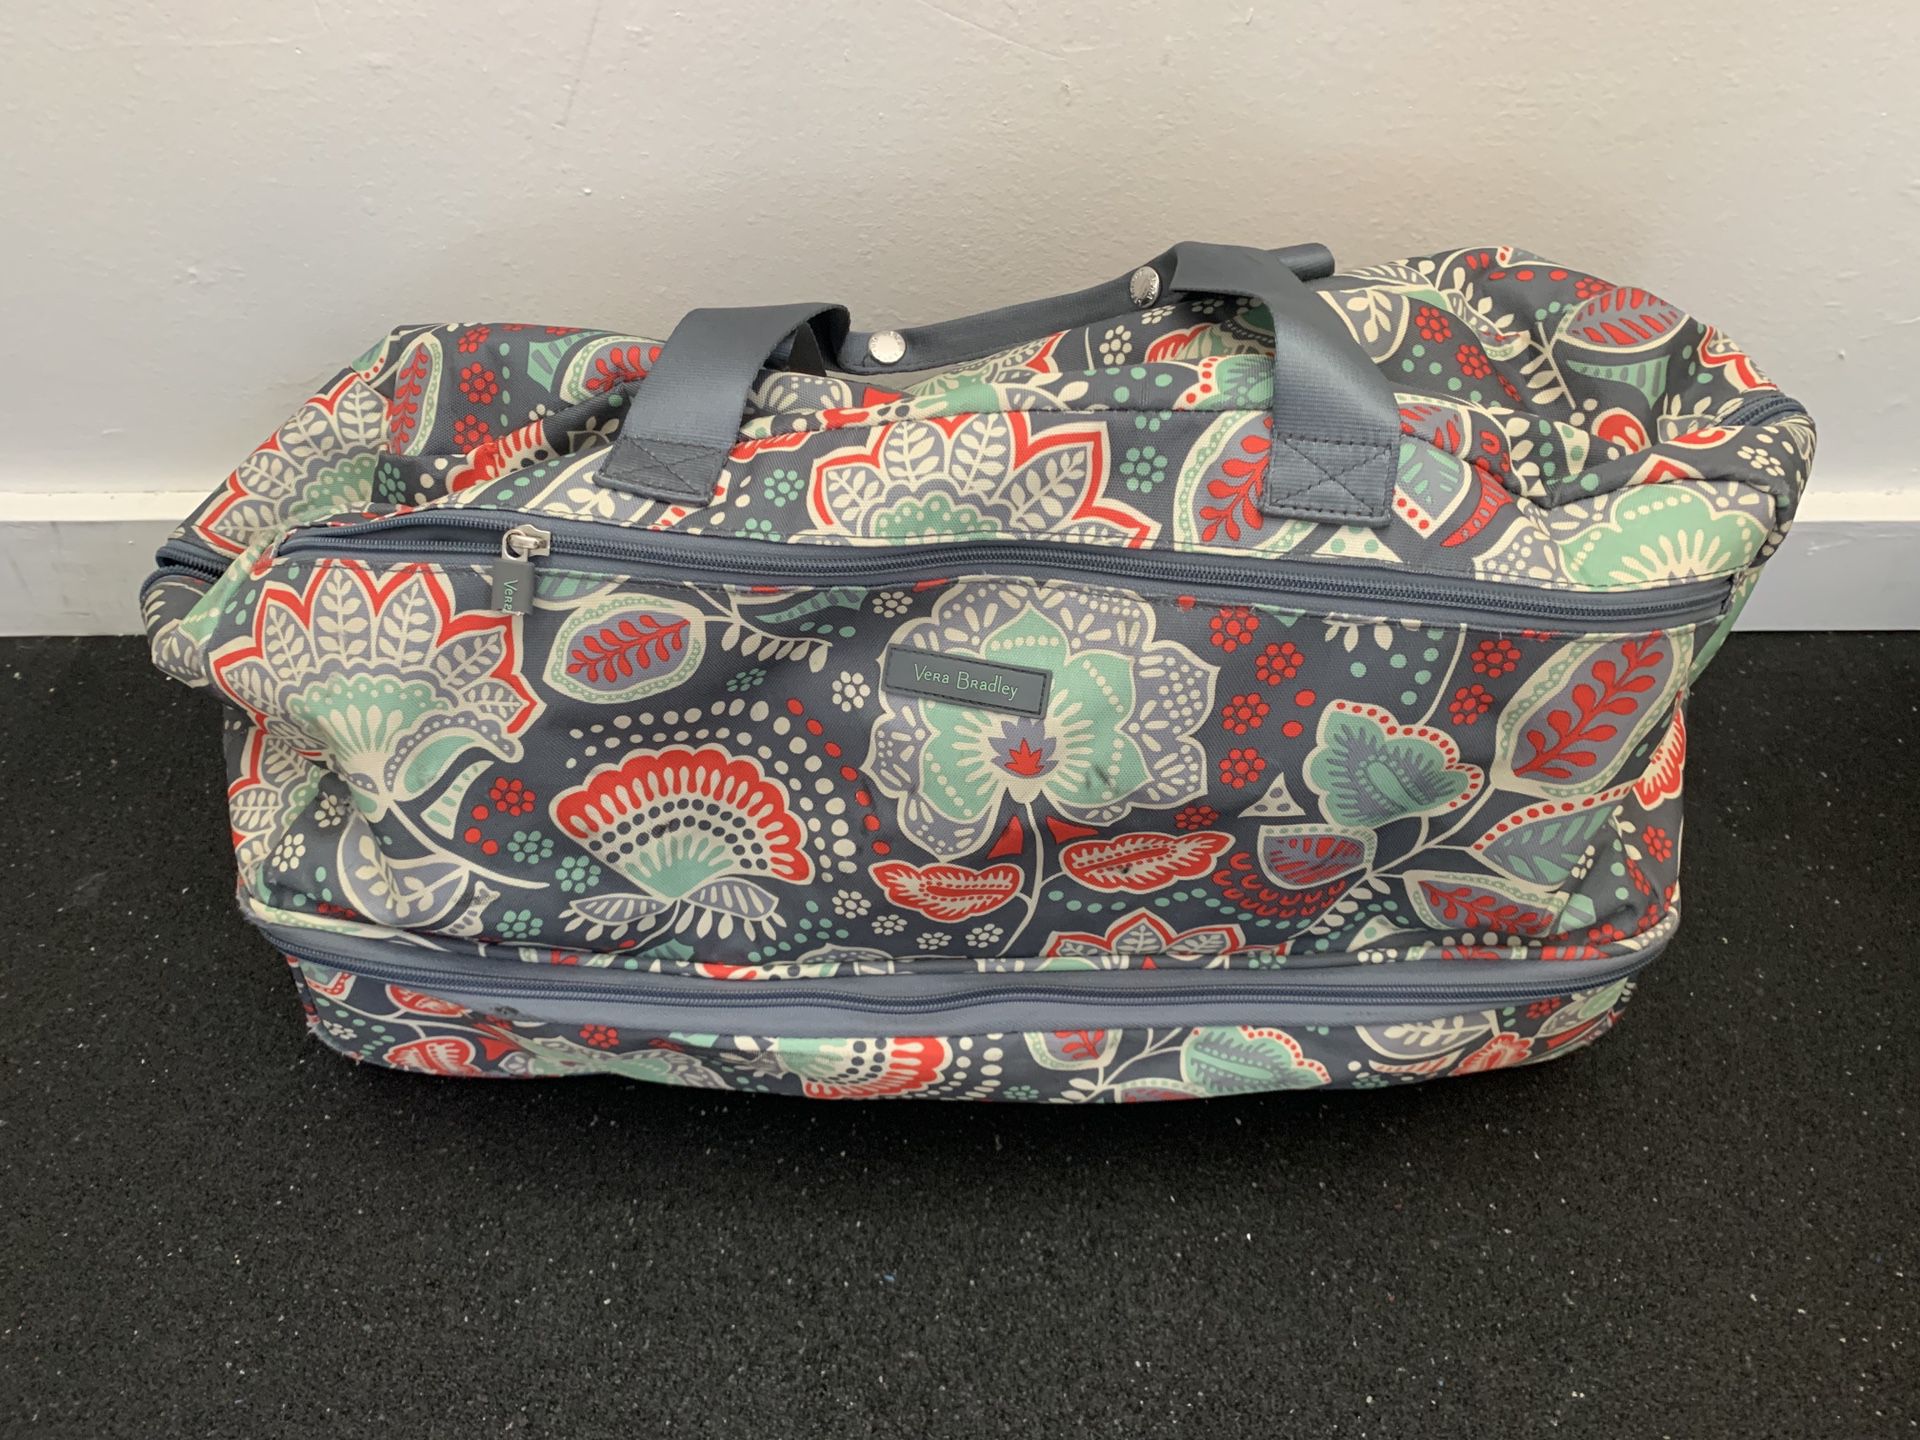 Vera Bradley rolling duffle bag and matching backpack.